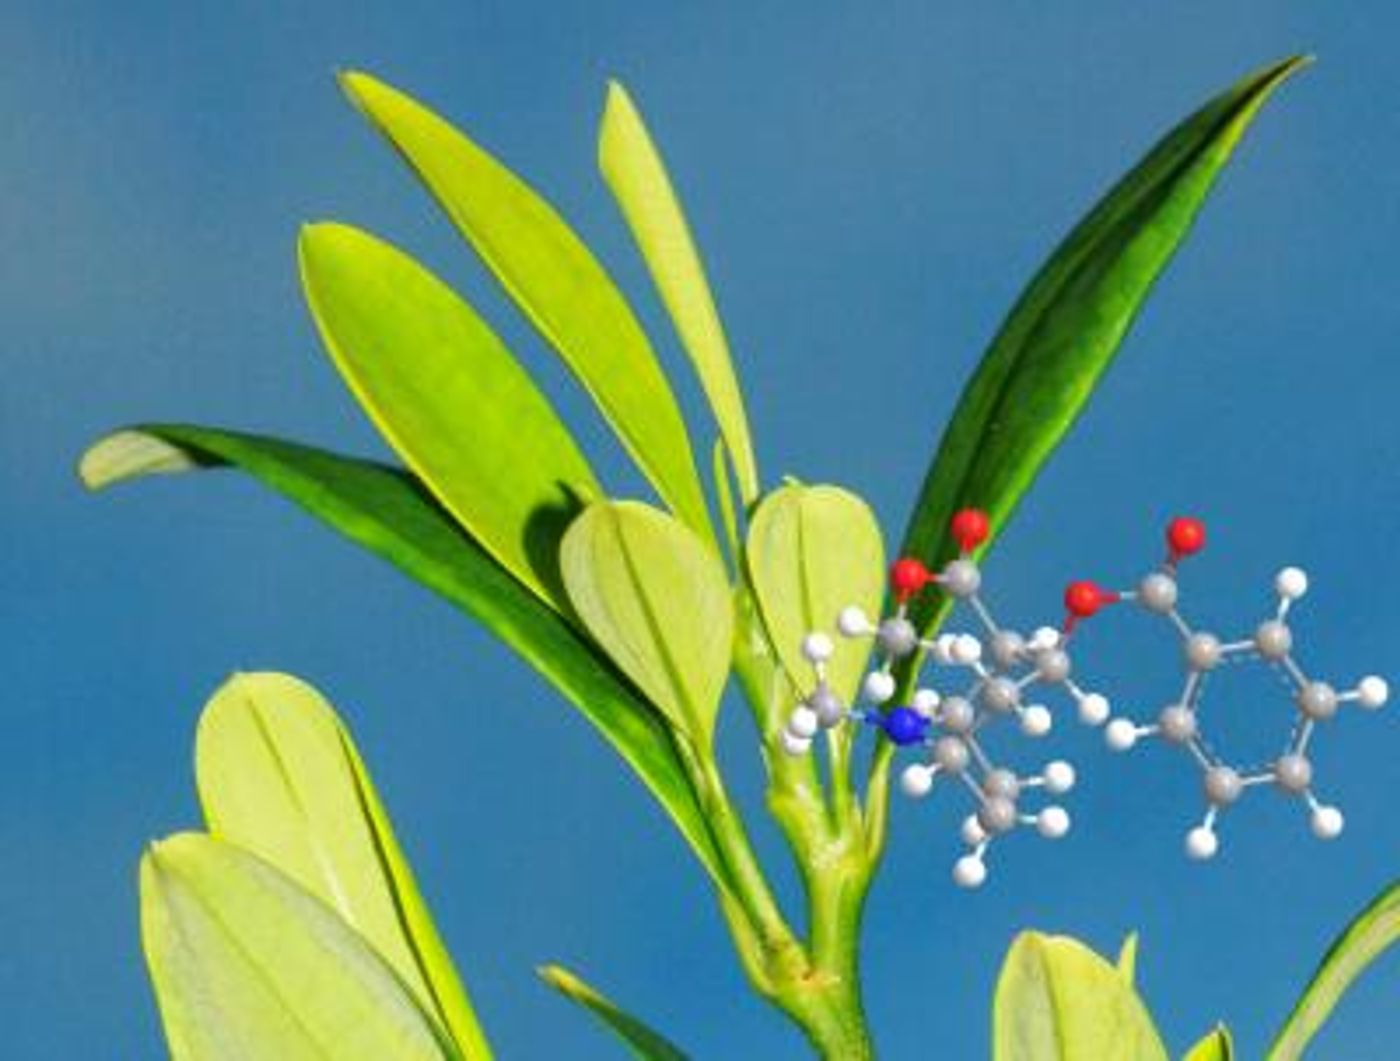 This is the coca plant (Erythroxylum coca) and the molecular structure of cocaine (grey: carbon, blue: nitrogen, red: oxygen, white: hydrogen). / Credit: Max Planck Institute for Chemical Ecology/ D'Auria, Jirschitzka